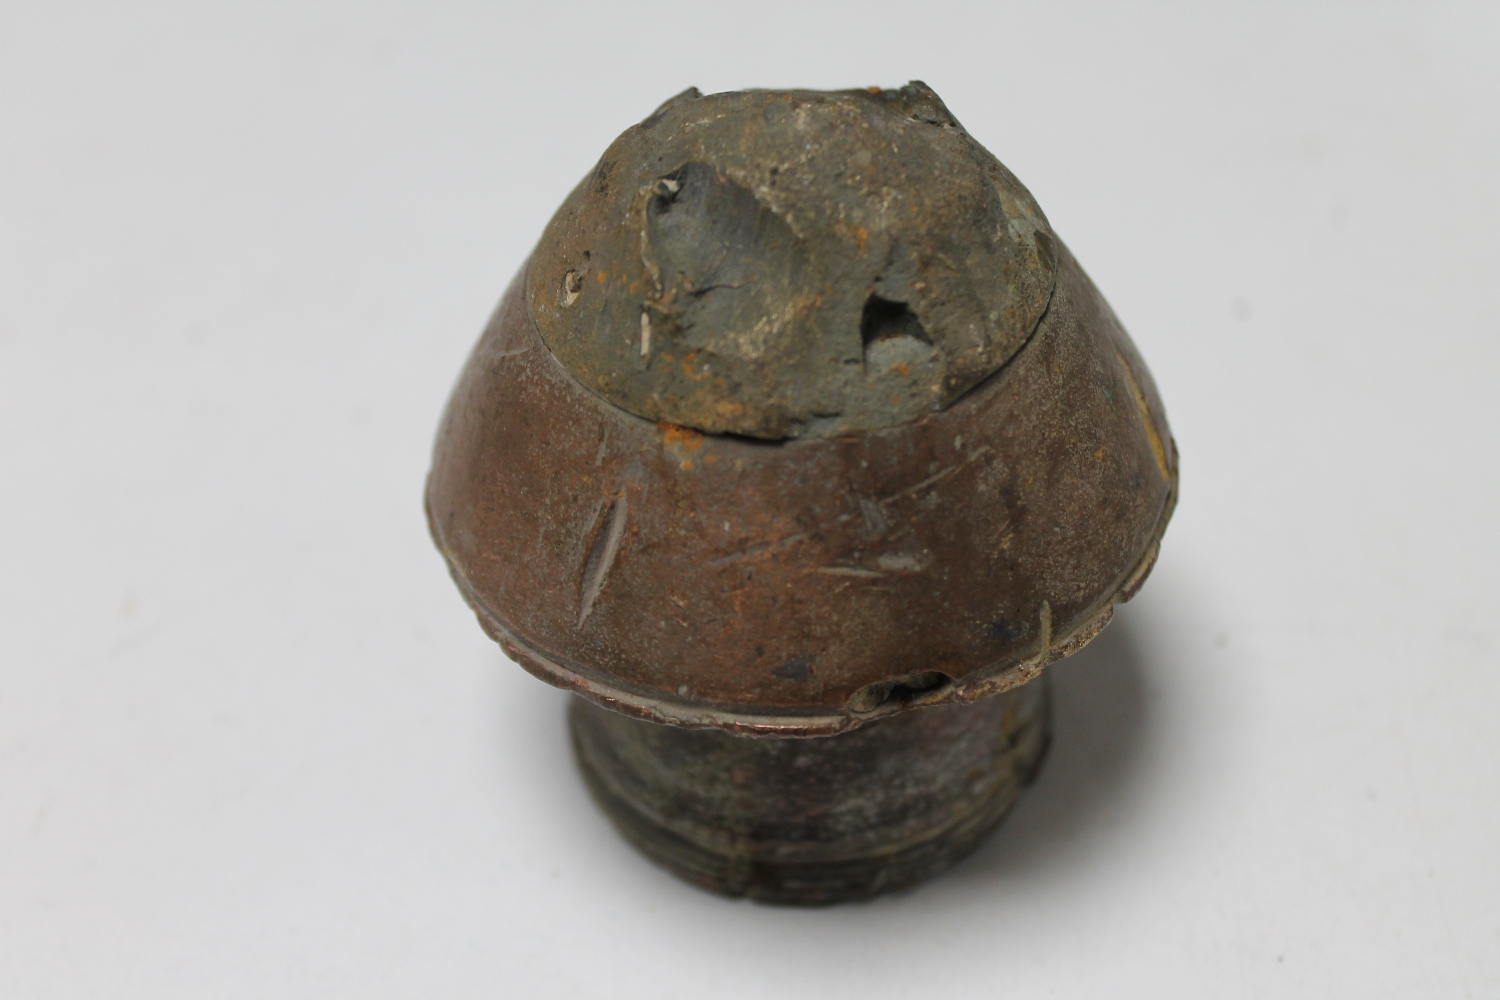 A World War I trench art paperweight fuse tip